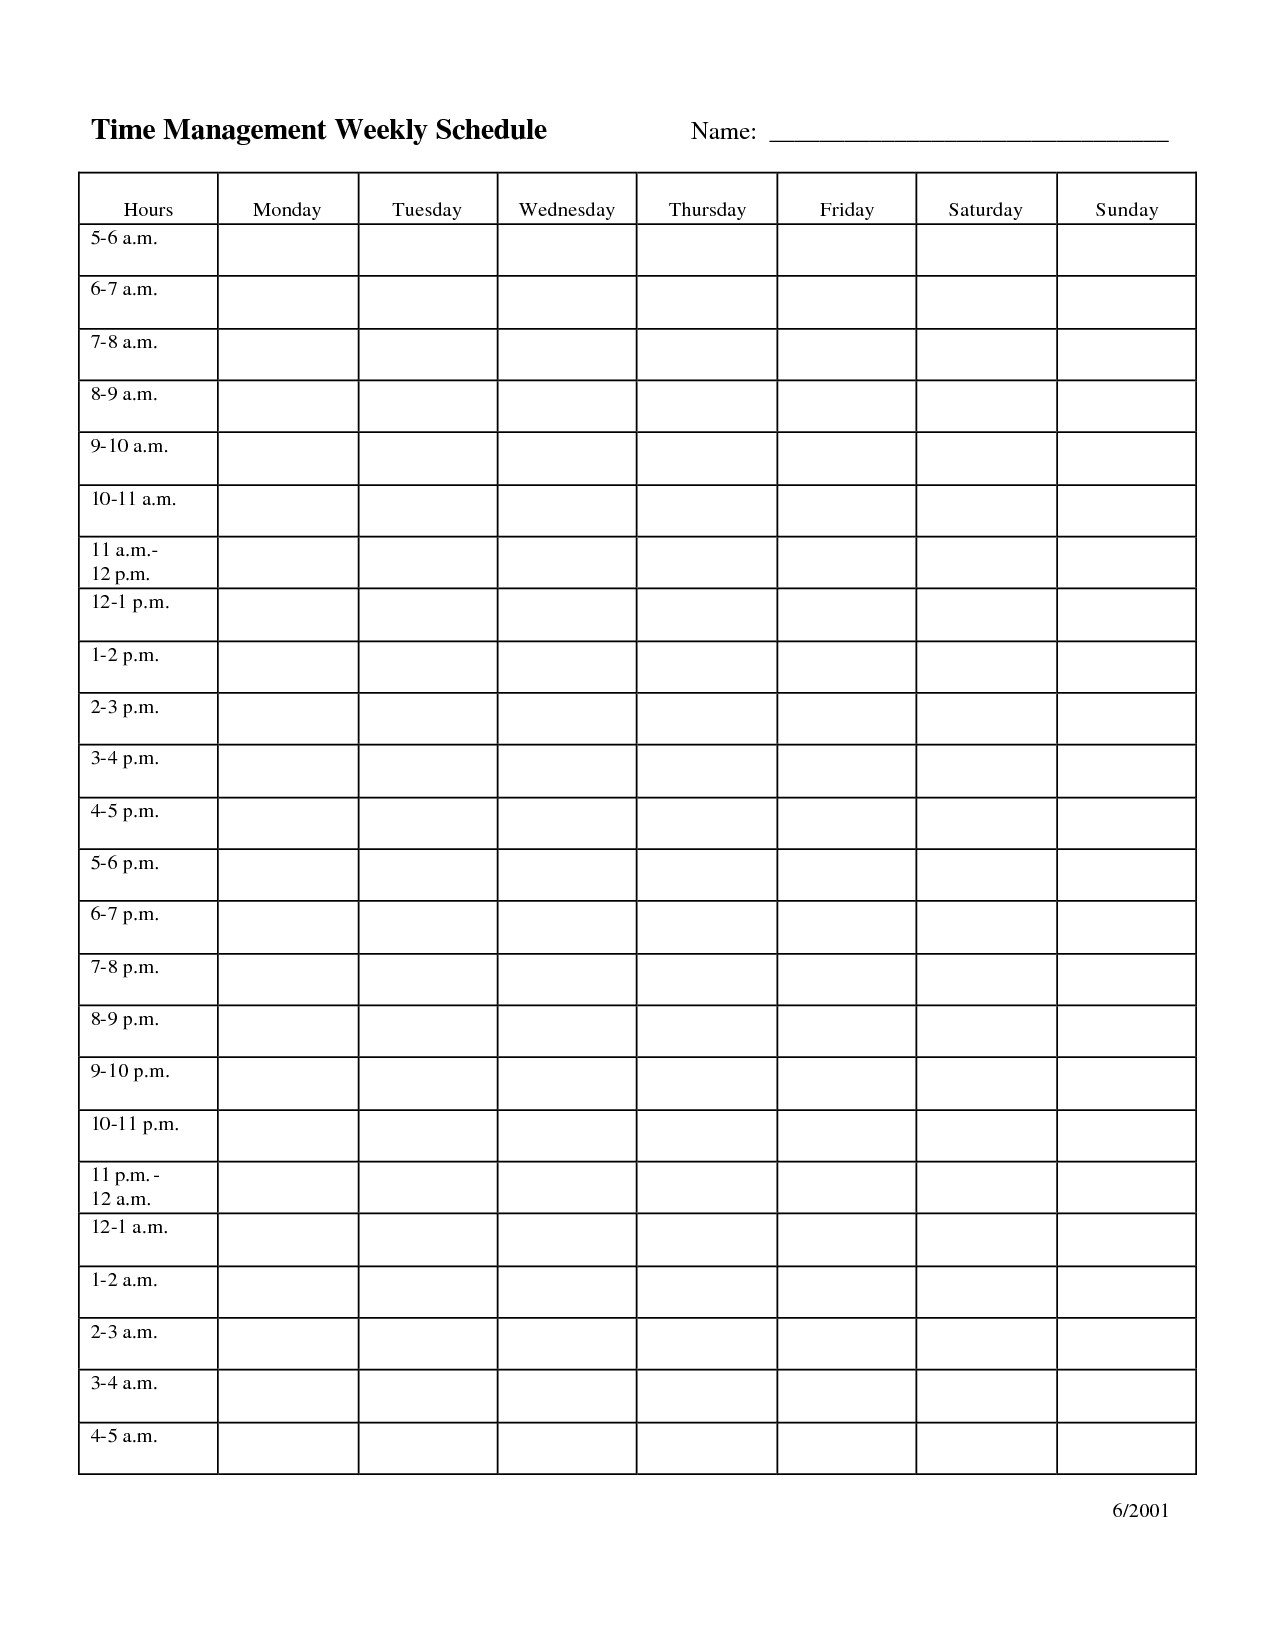 Weekly Schedule With Time Slots Template Planner Times Pdf Monday within Weekly Planner Template With Time Slots